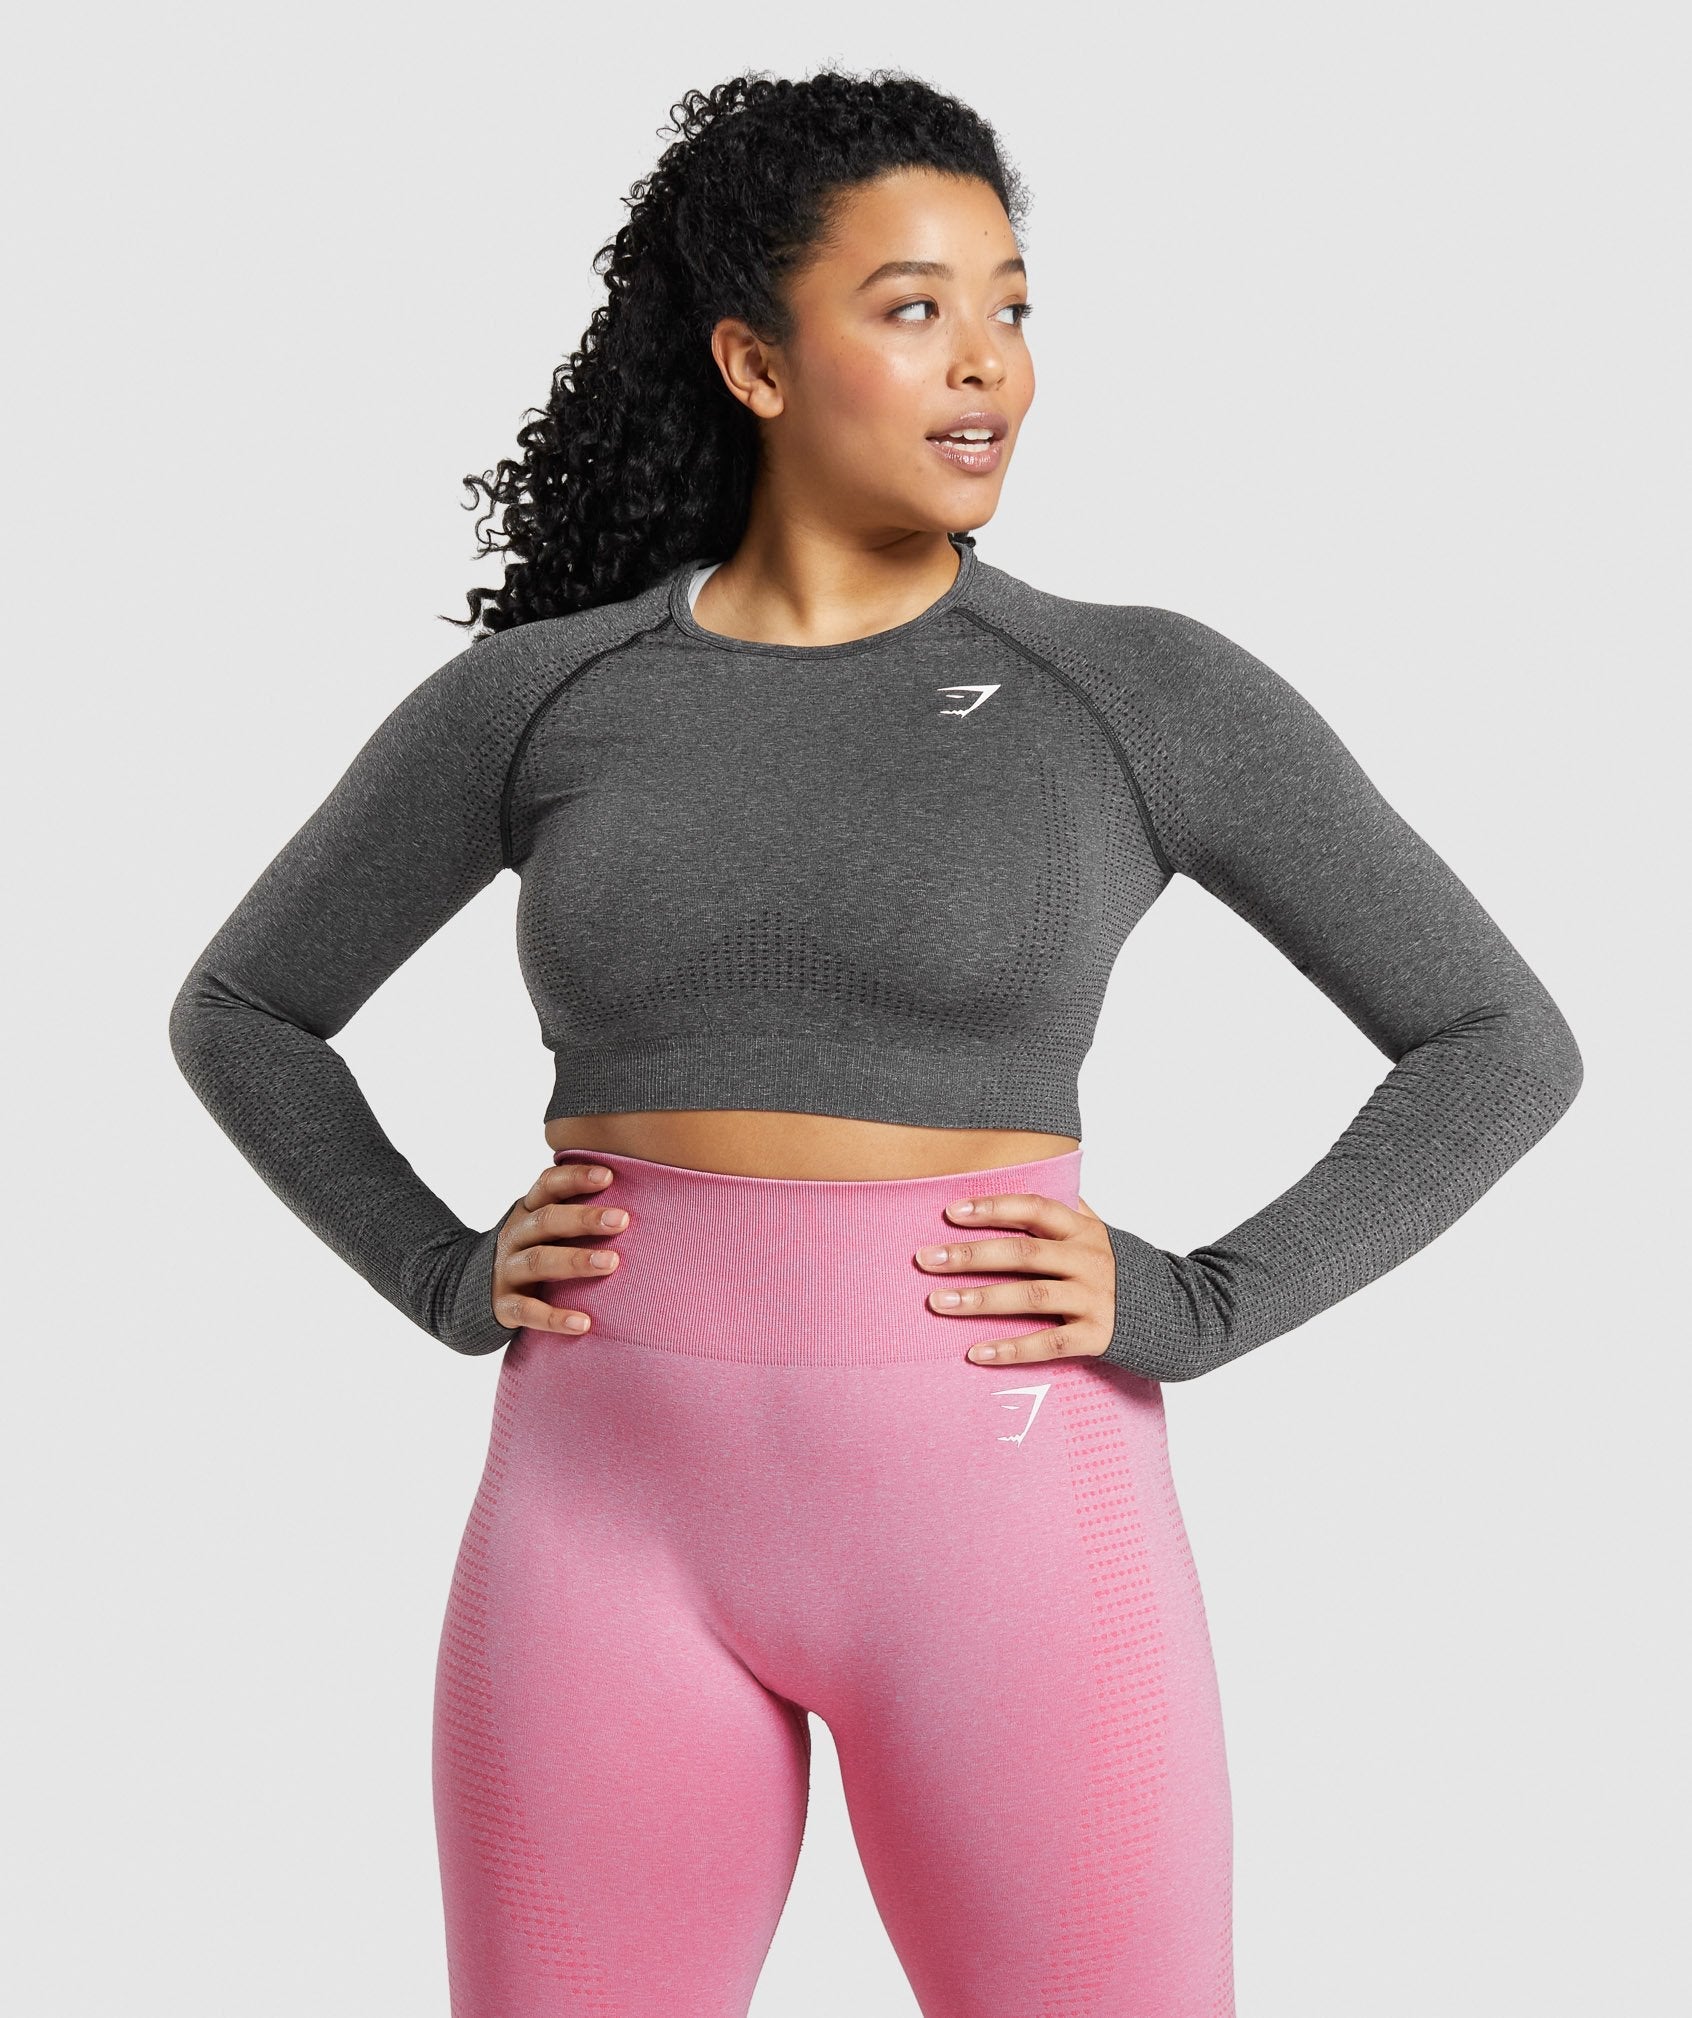 Empowering Women with Gymshark